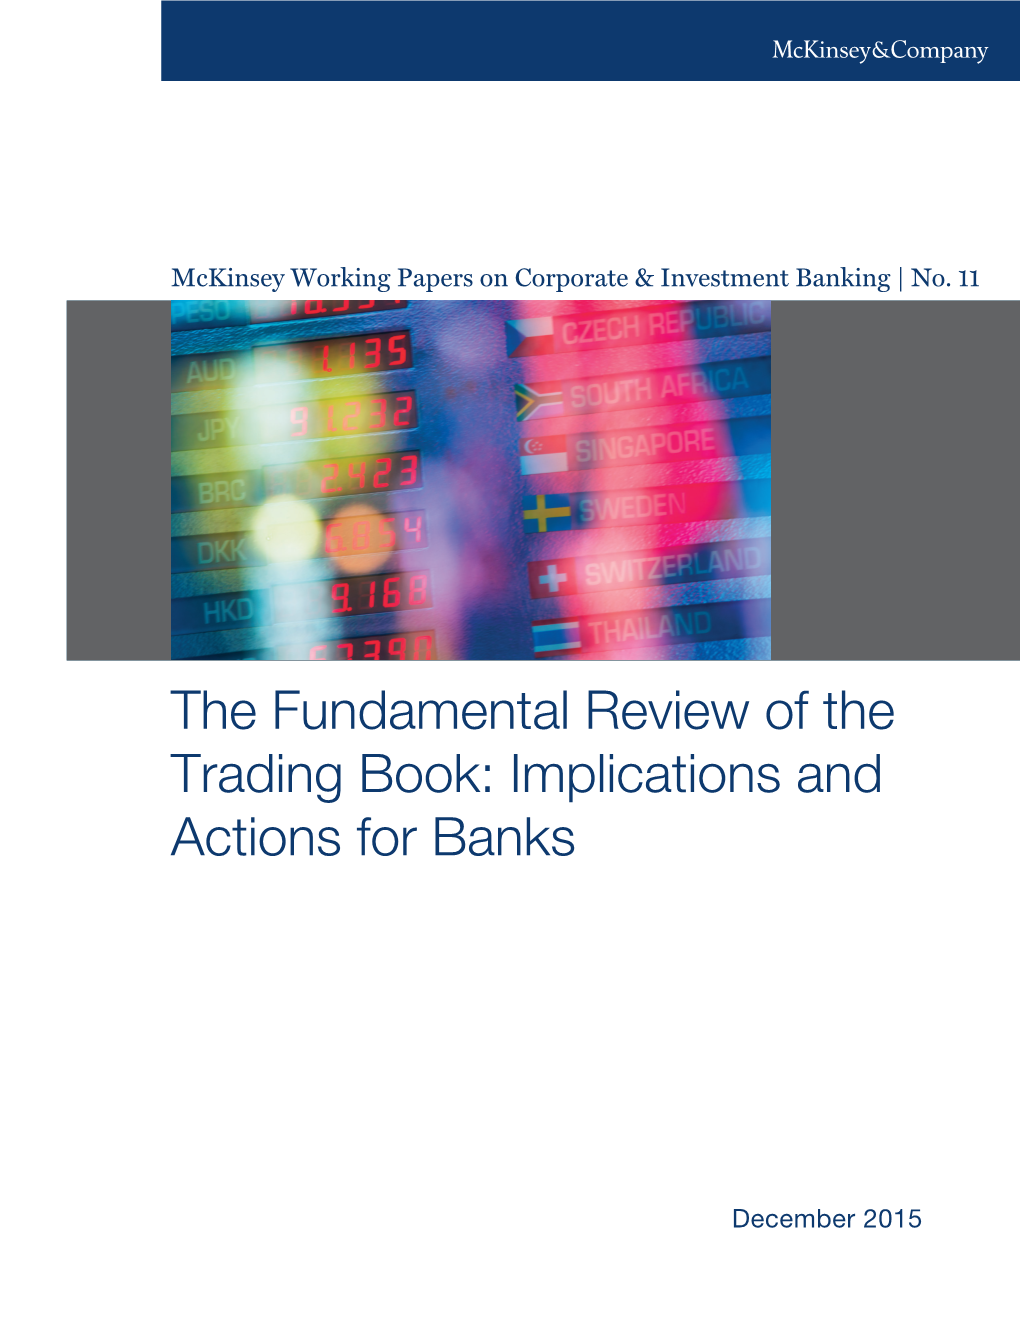 The Fundamental Review of the Trading Book: Implications and Actions for Banks